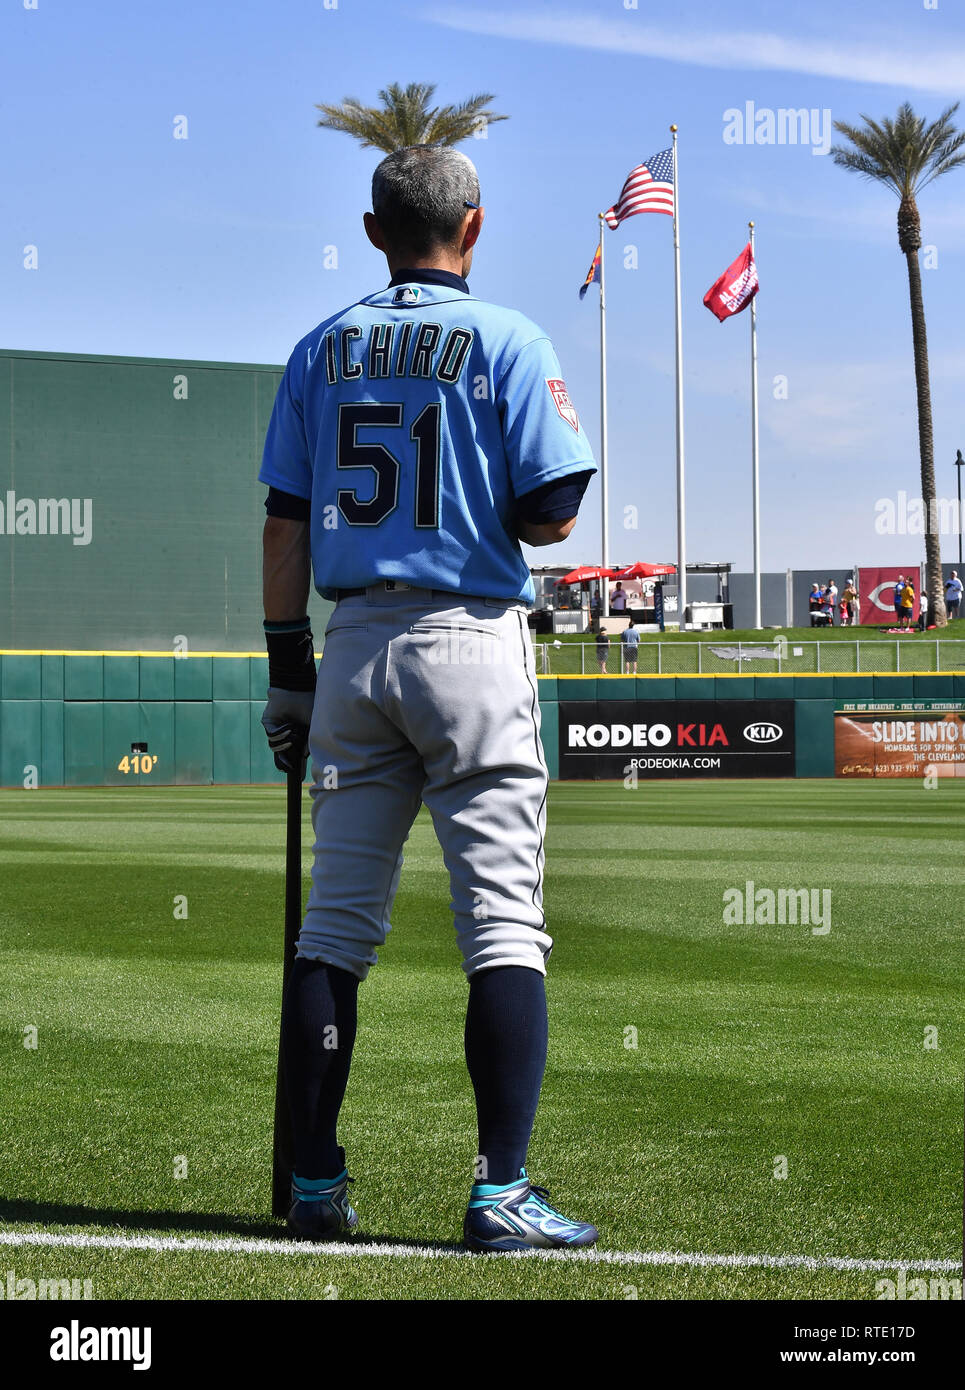 Seattle Mariners' Ichiro Suzuki listens to the national anthem before a spring  training baseball game against the Cleveland Indians at Goodyear Ballpark  in Goodyear, Arizona, United States, February 27, 2019. Credit: AFLO/Alamy